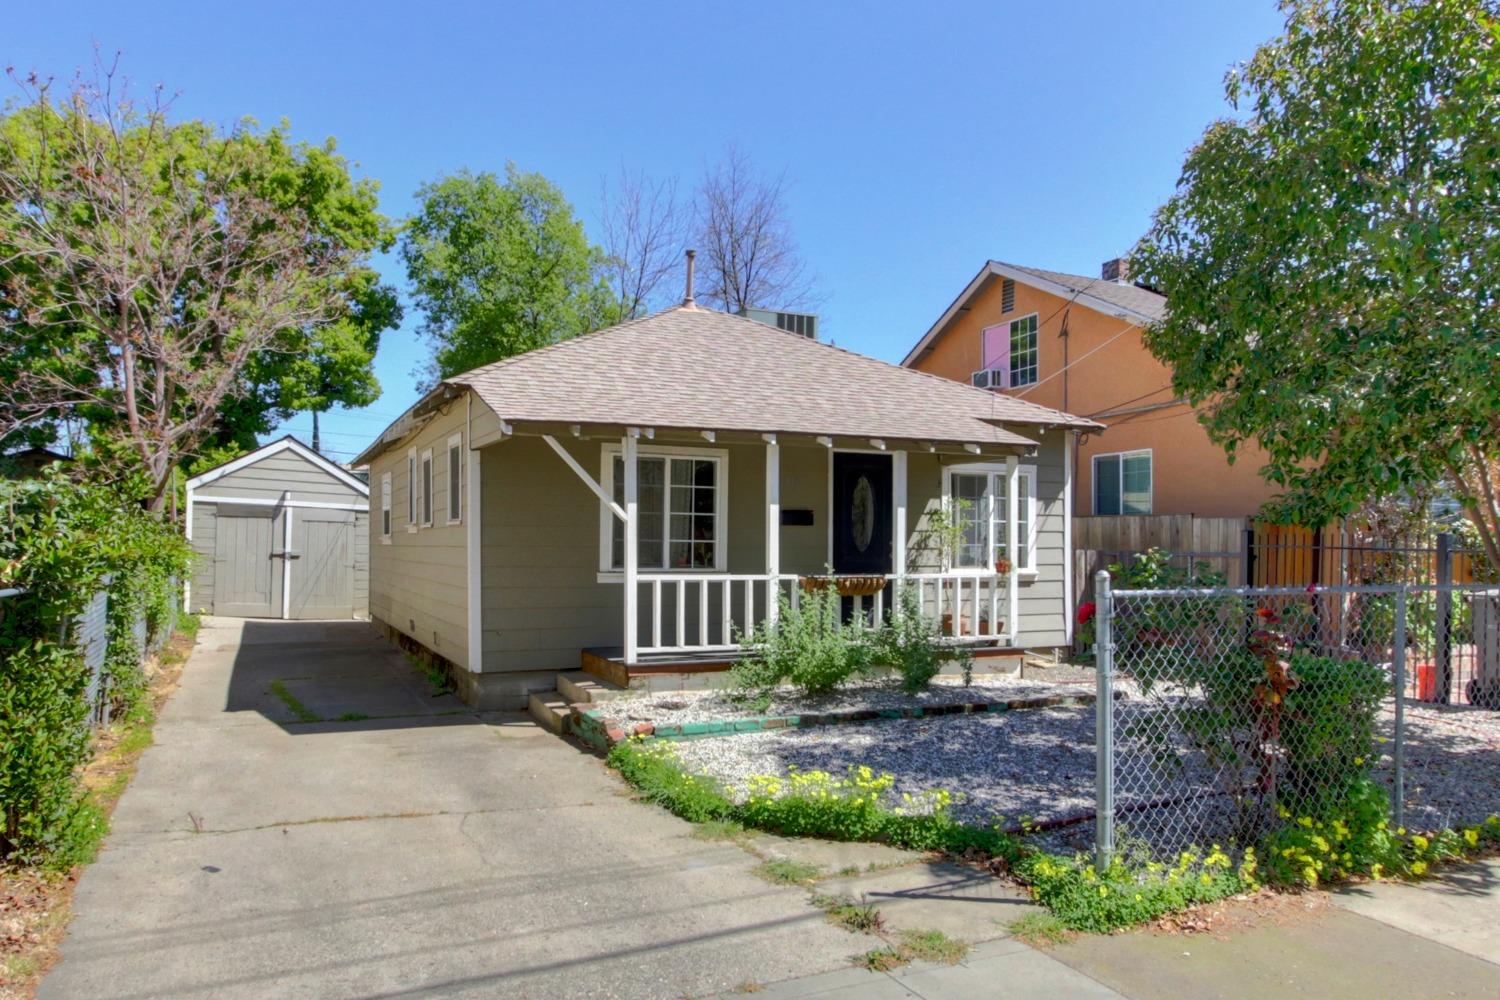 Photo of 3101 43rd St in Sacramento, CA